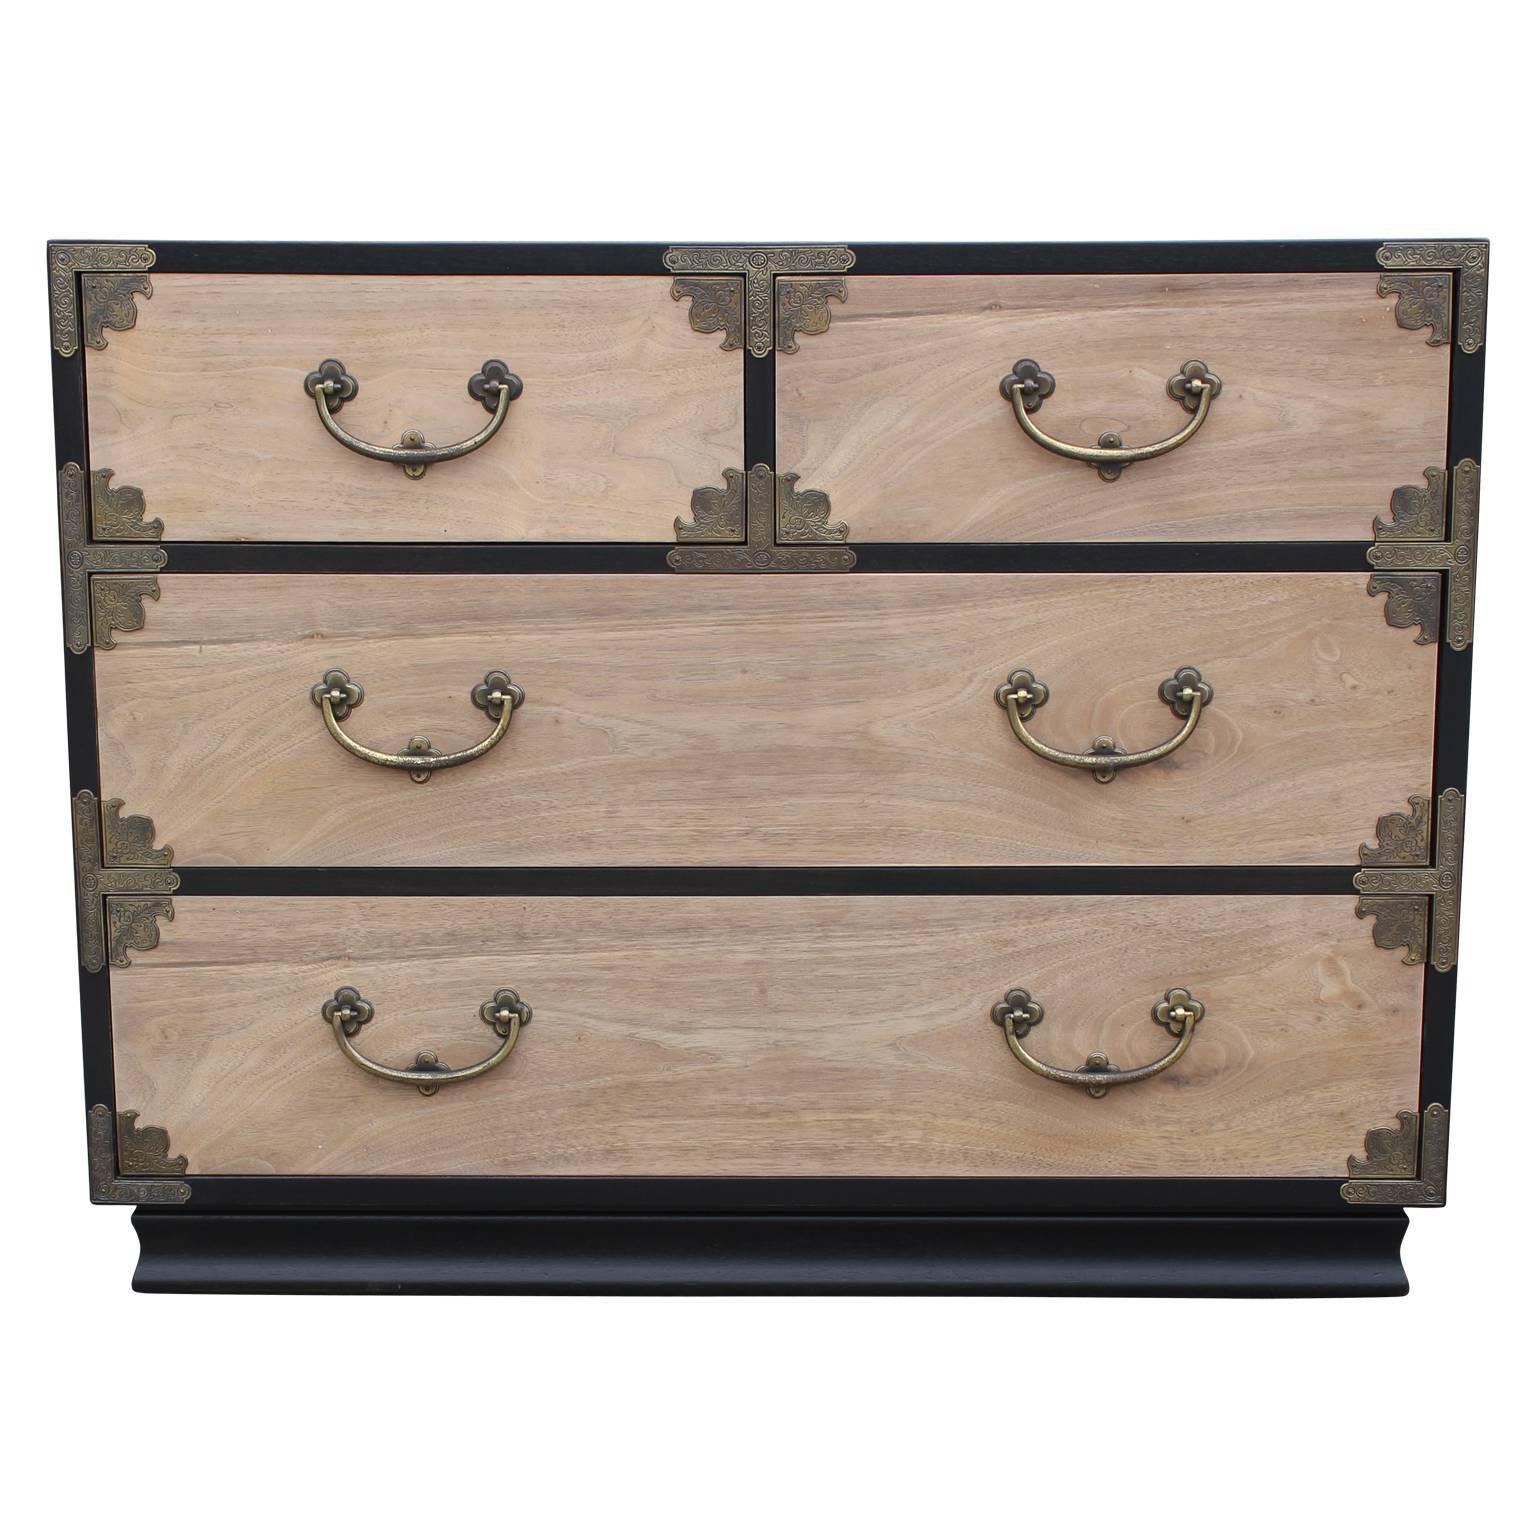 Luxe pair of two tone Henredon nightstands or bachelor's chests. Chests are made out of walnut that has recently been bleached. Intricate brass tone hardware has an excellent patina. The chests / cabinet are in very nice vintage condition with light